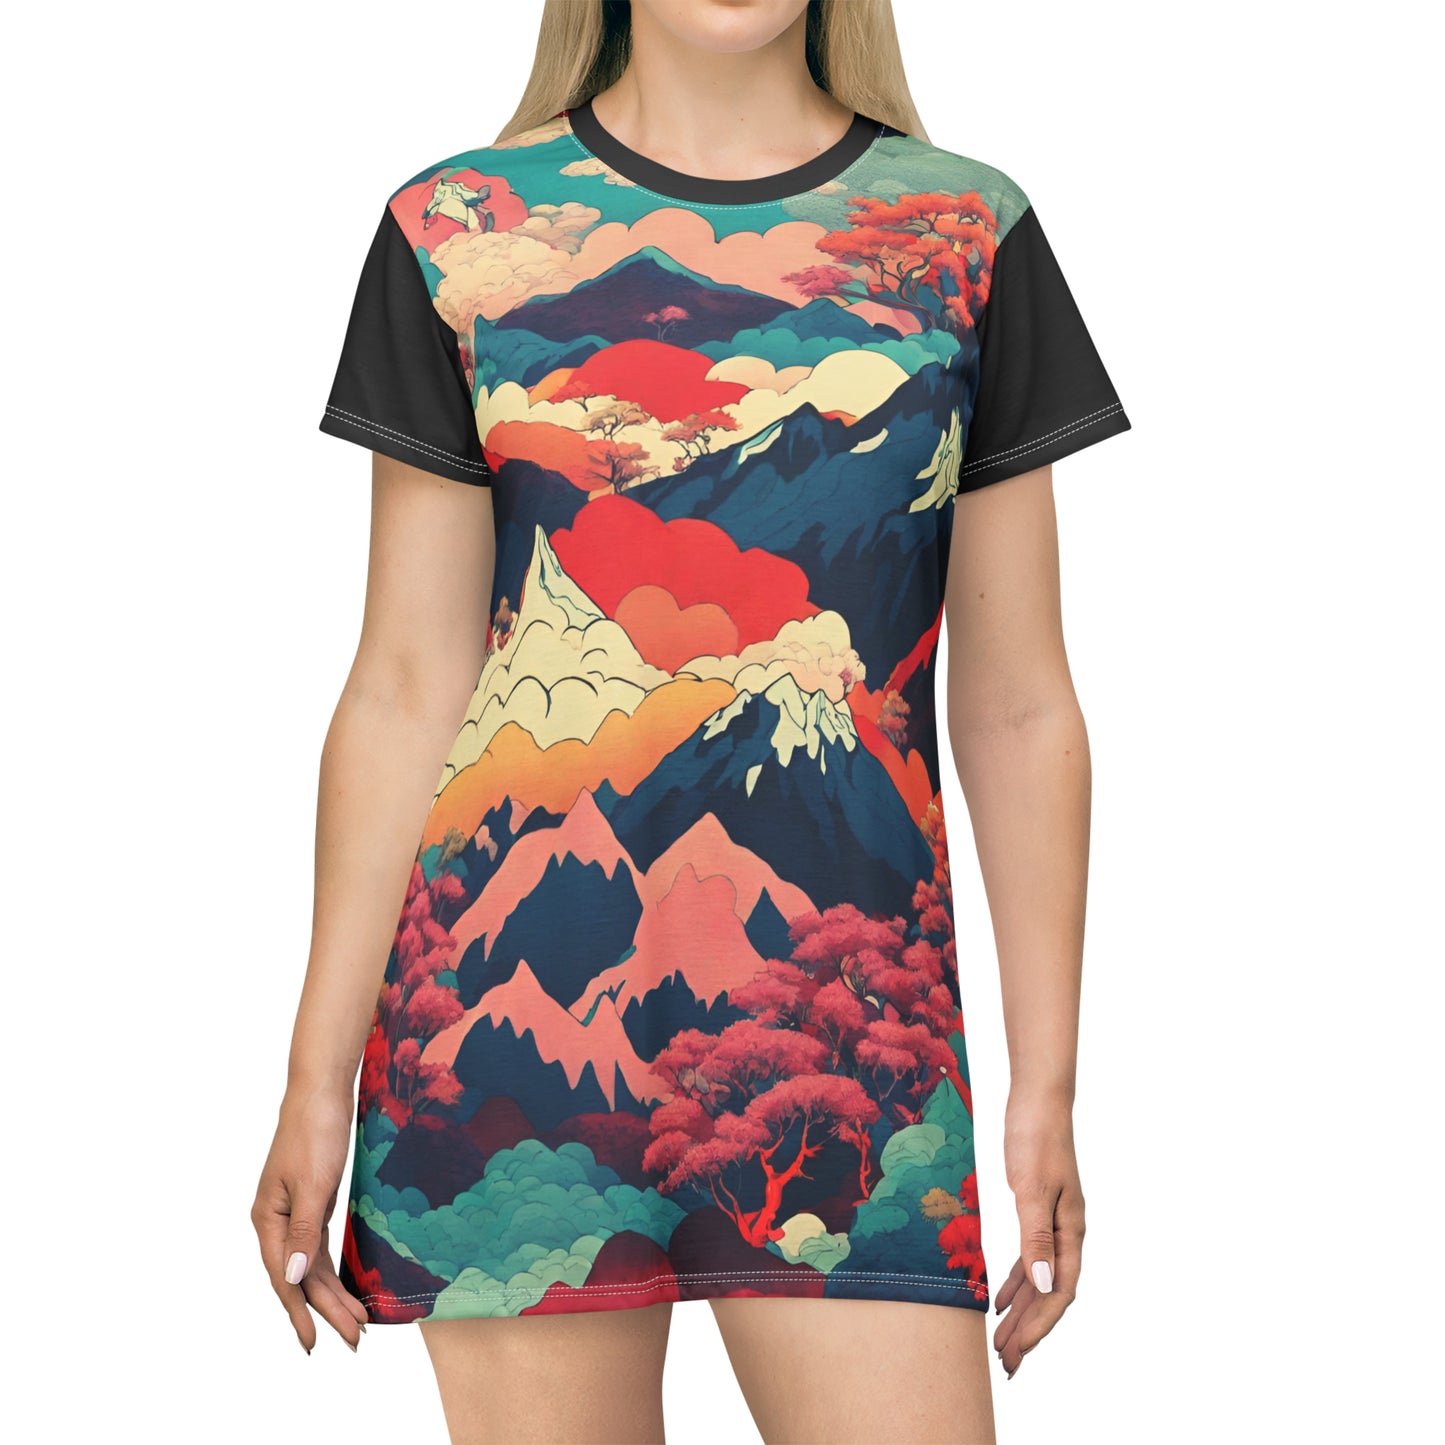 Candy-colored Mountains T-Shirt Dress